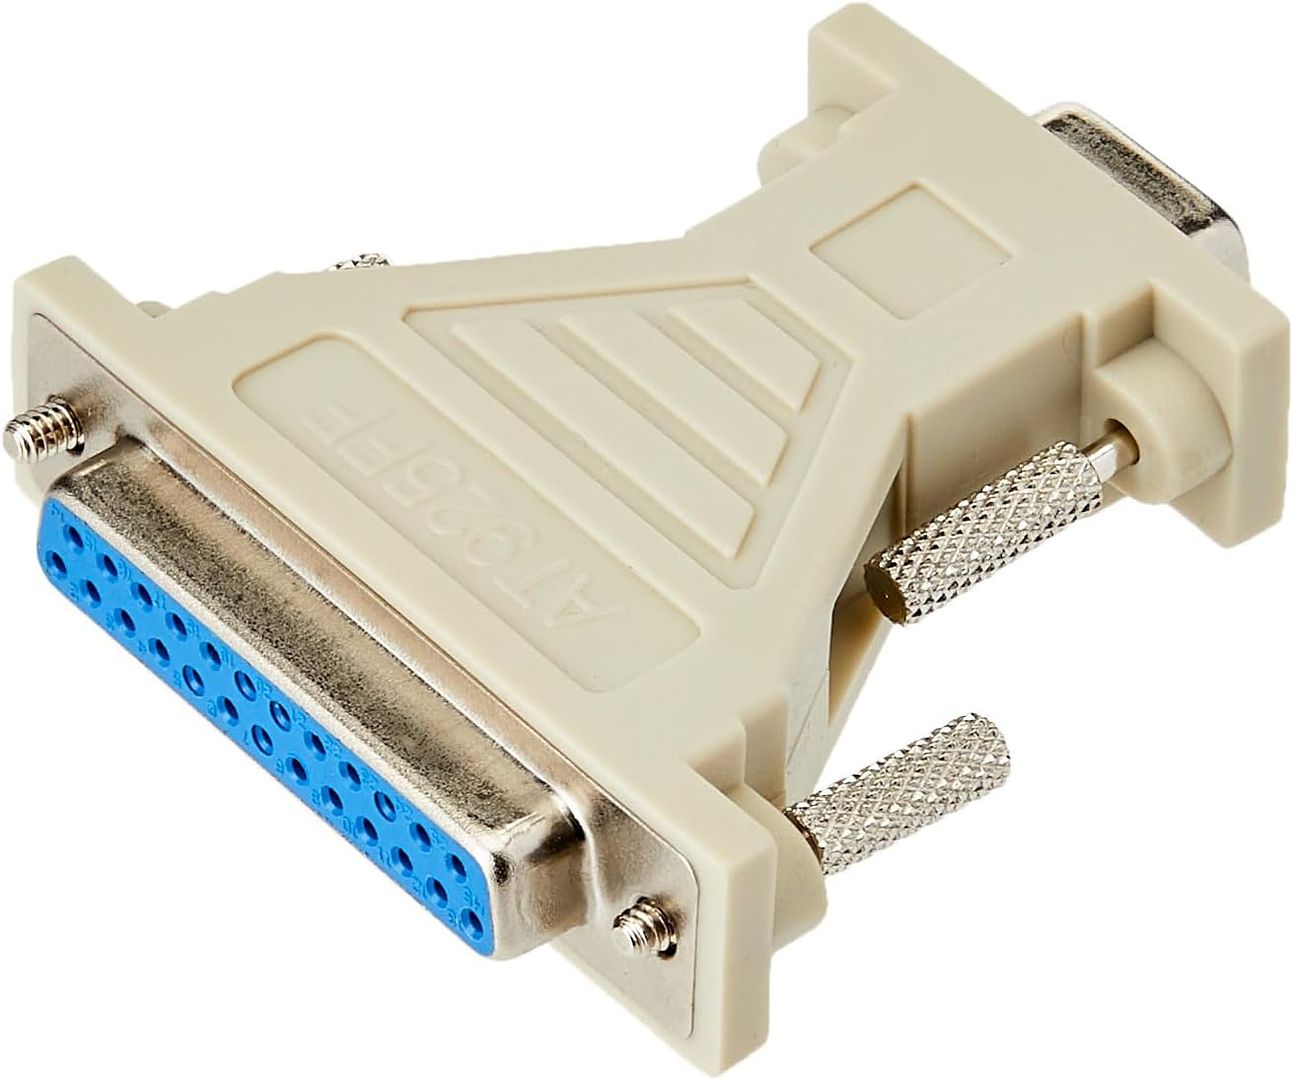 StarTech.com DB9 to DB25 Serial Cable Adapter - F/F - Serial adapter - DB-9 (F) to DB-25 (F) - AT925FF, Beige